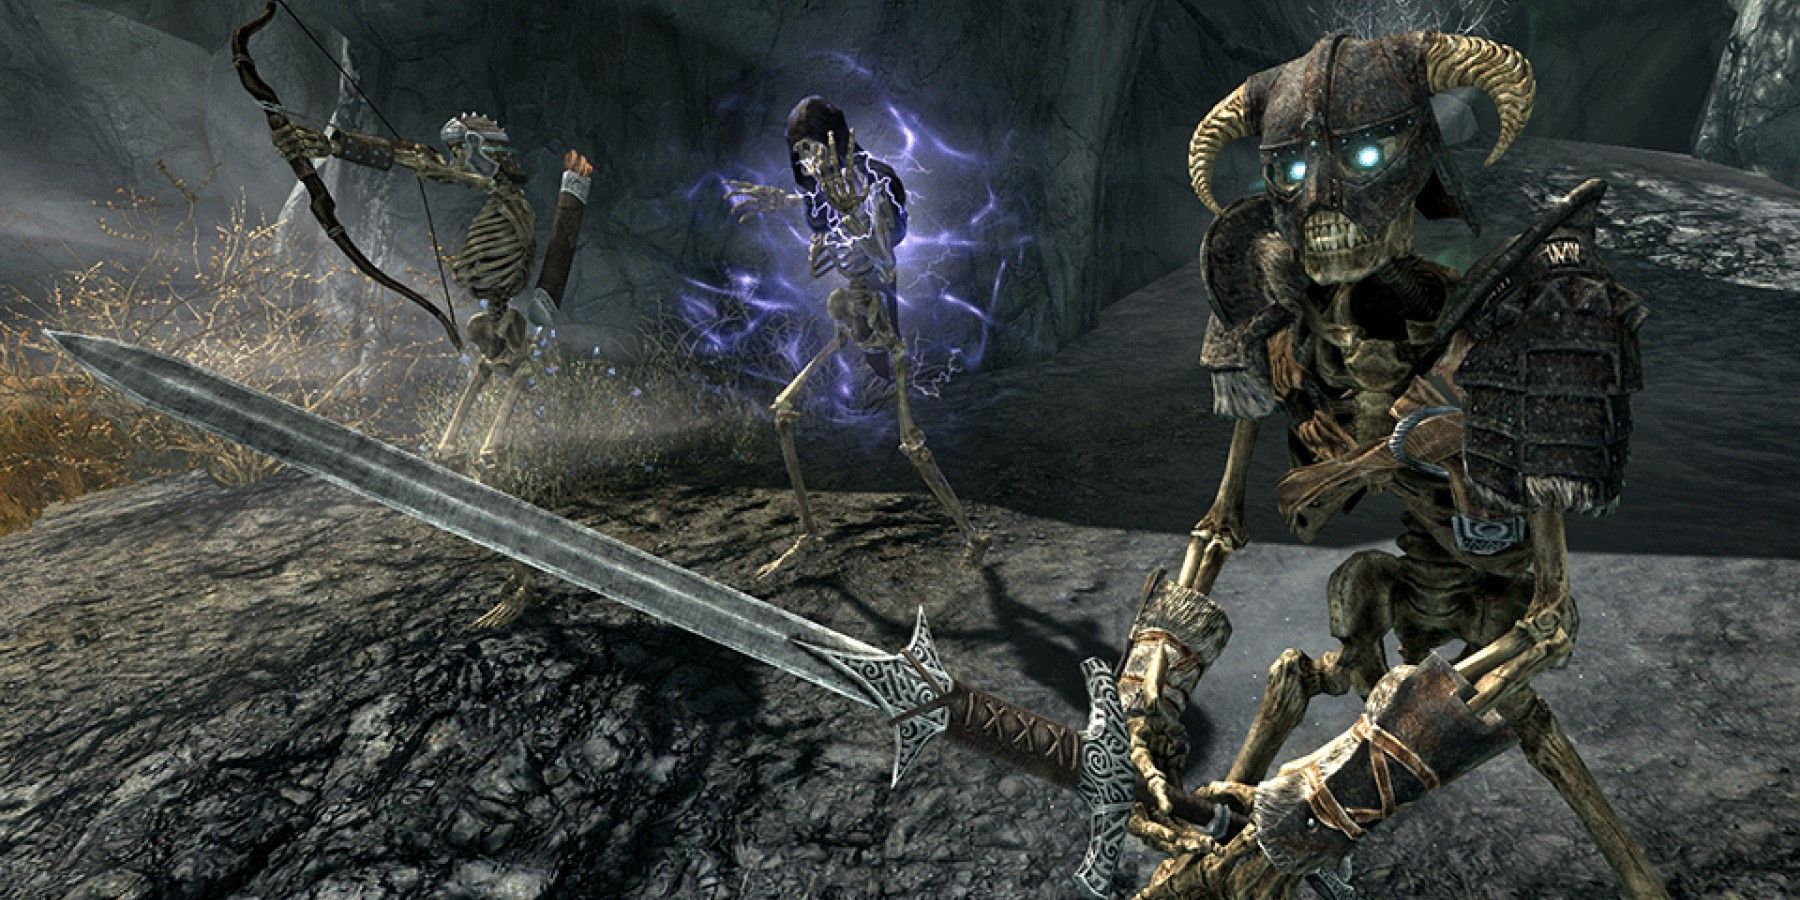 Skeletal minions summoned by a necromancer in Skyrim